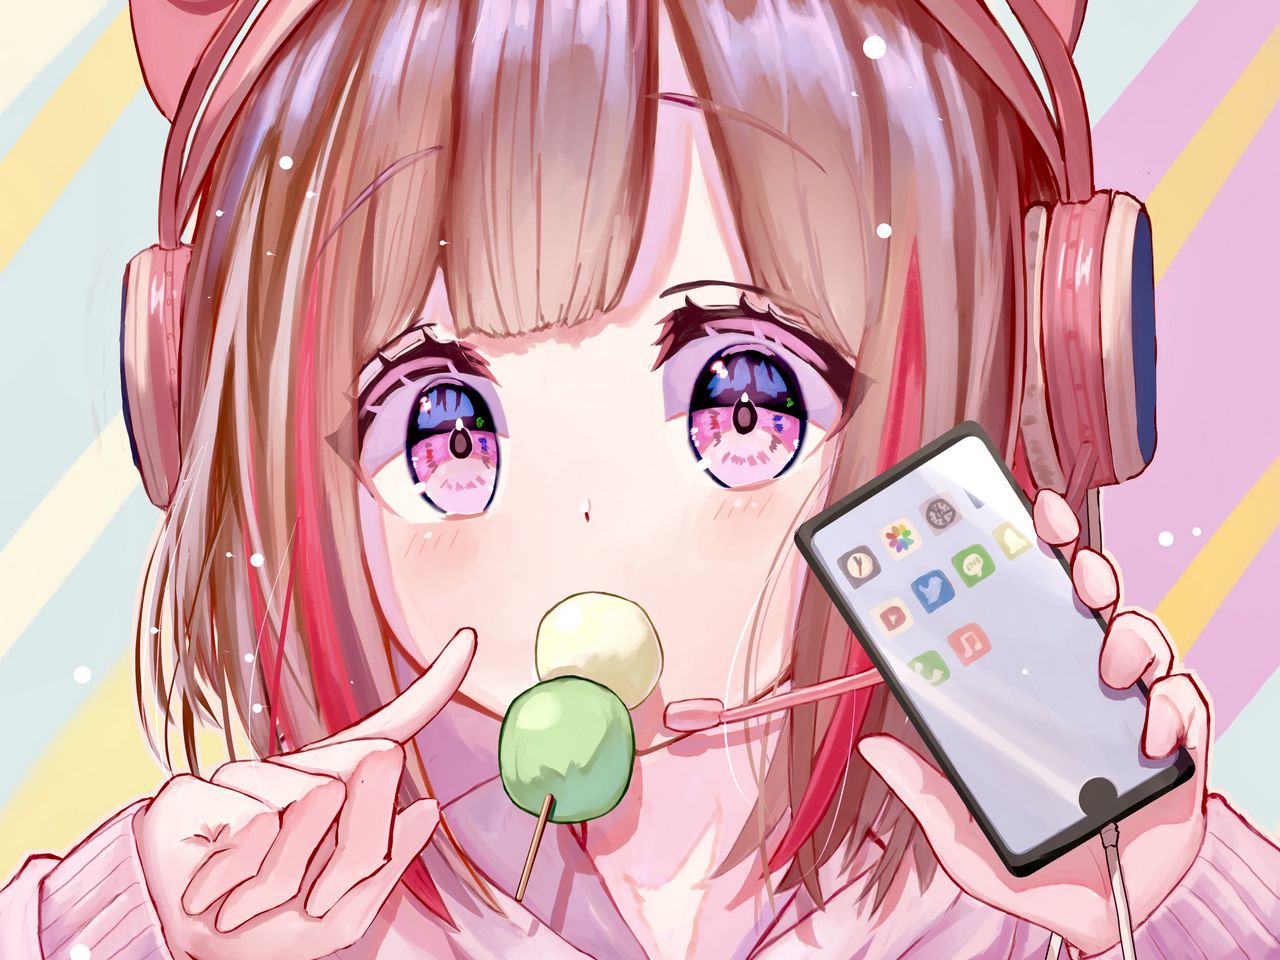 Download wallpaper 1280x960 girl, headphones, phone, candy, pink, anime standard 4:3 HD background